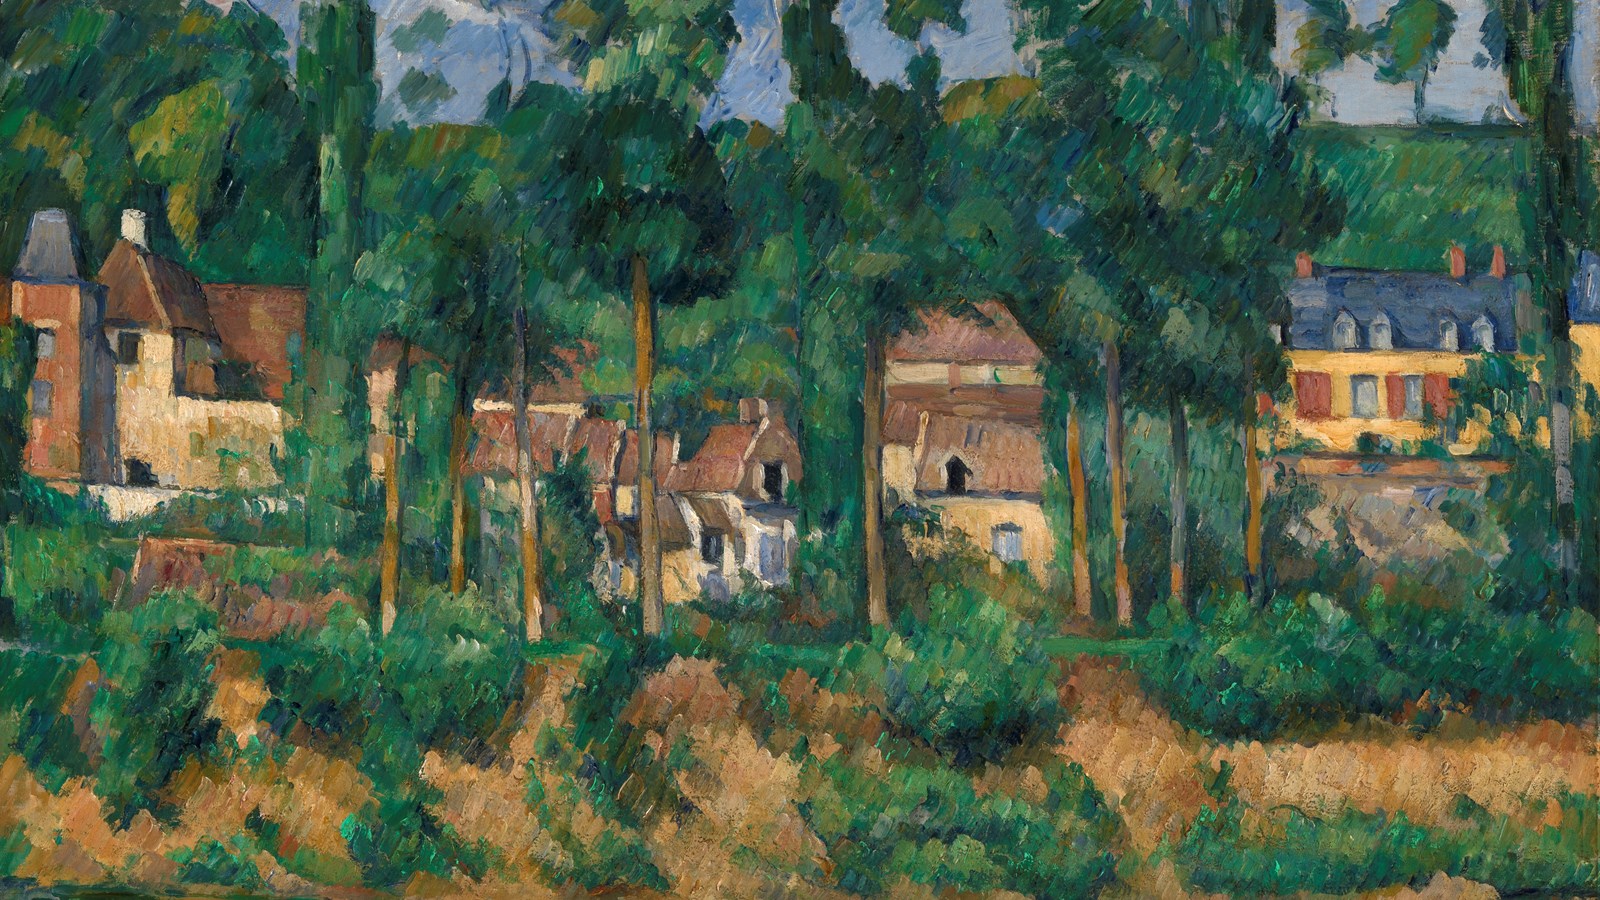 a painting of a riverside scene with tall trees, water, bushes and some red roofed houses in the background.